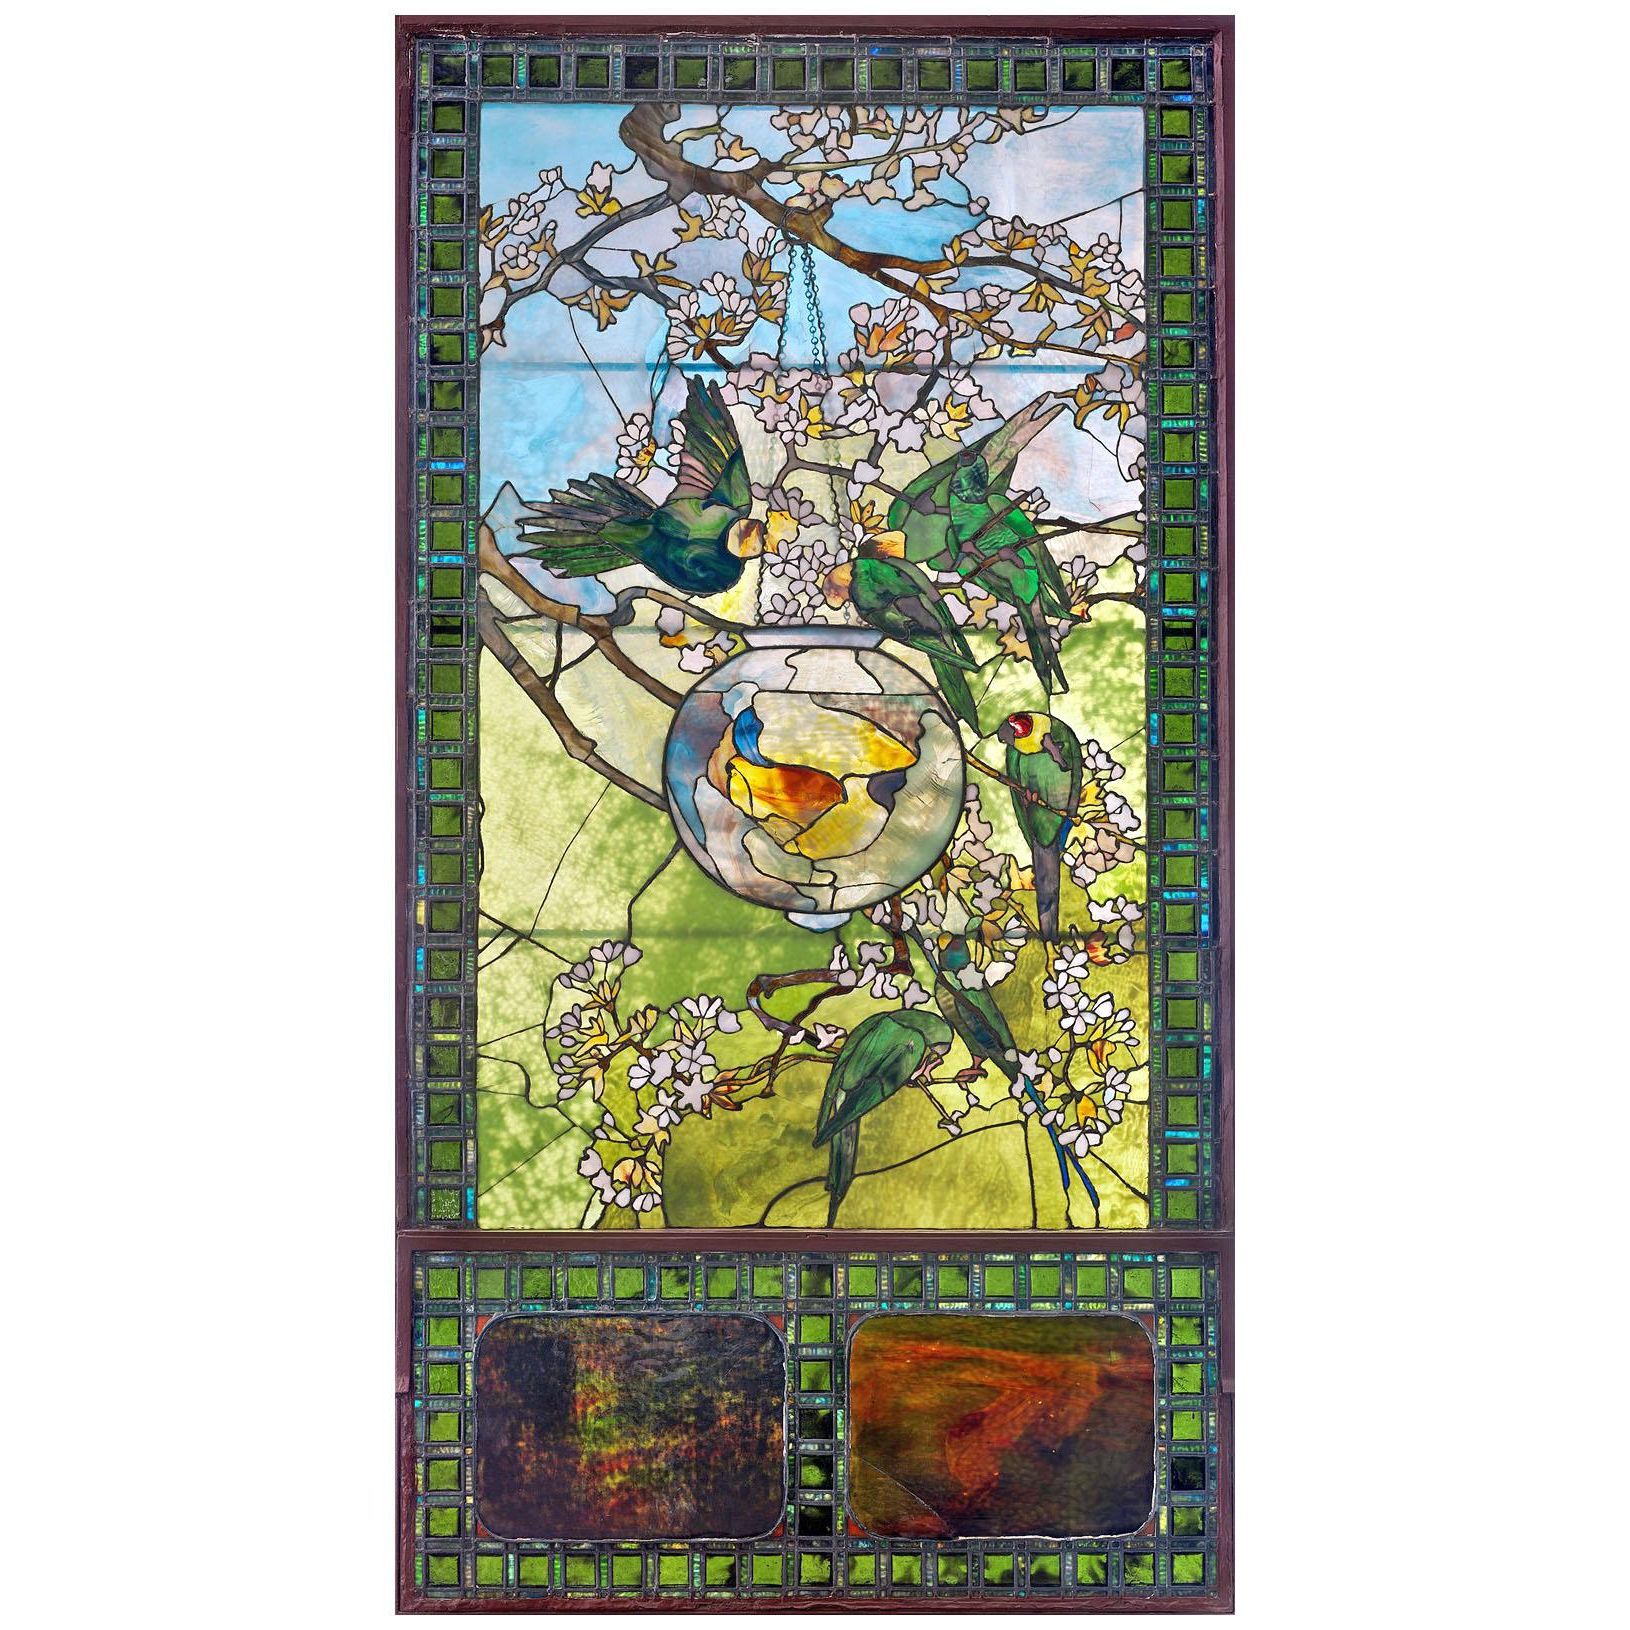 Louis Tiffany. Parakeets and Gold Fish Bowl. 1893. Museum of Fine Arts Boston